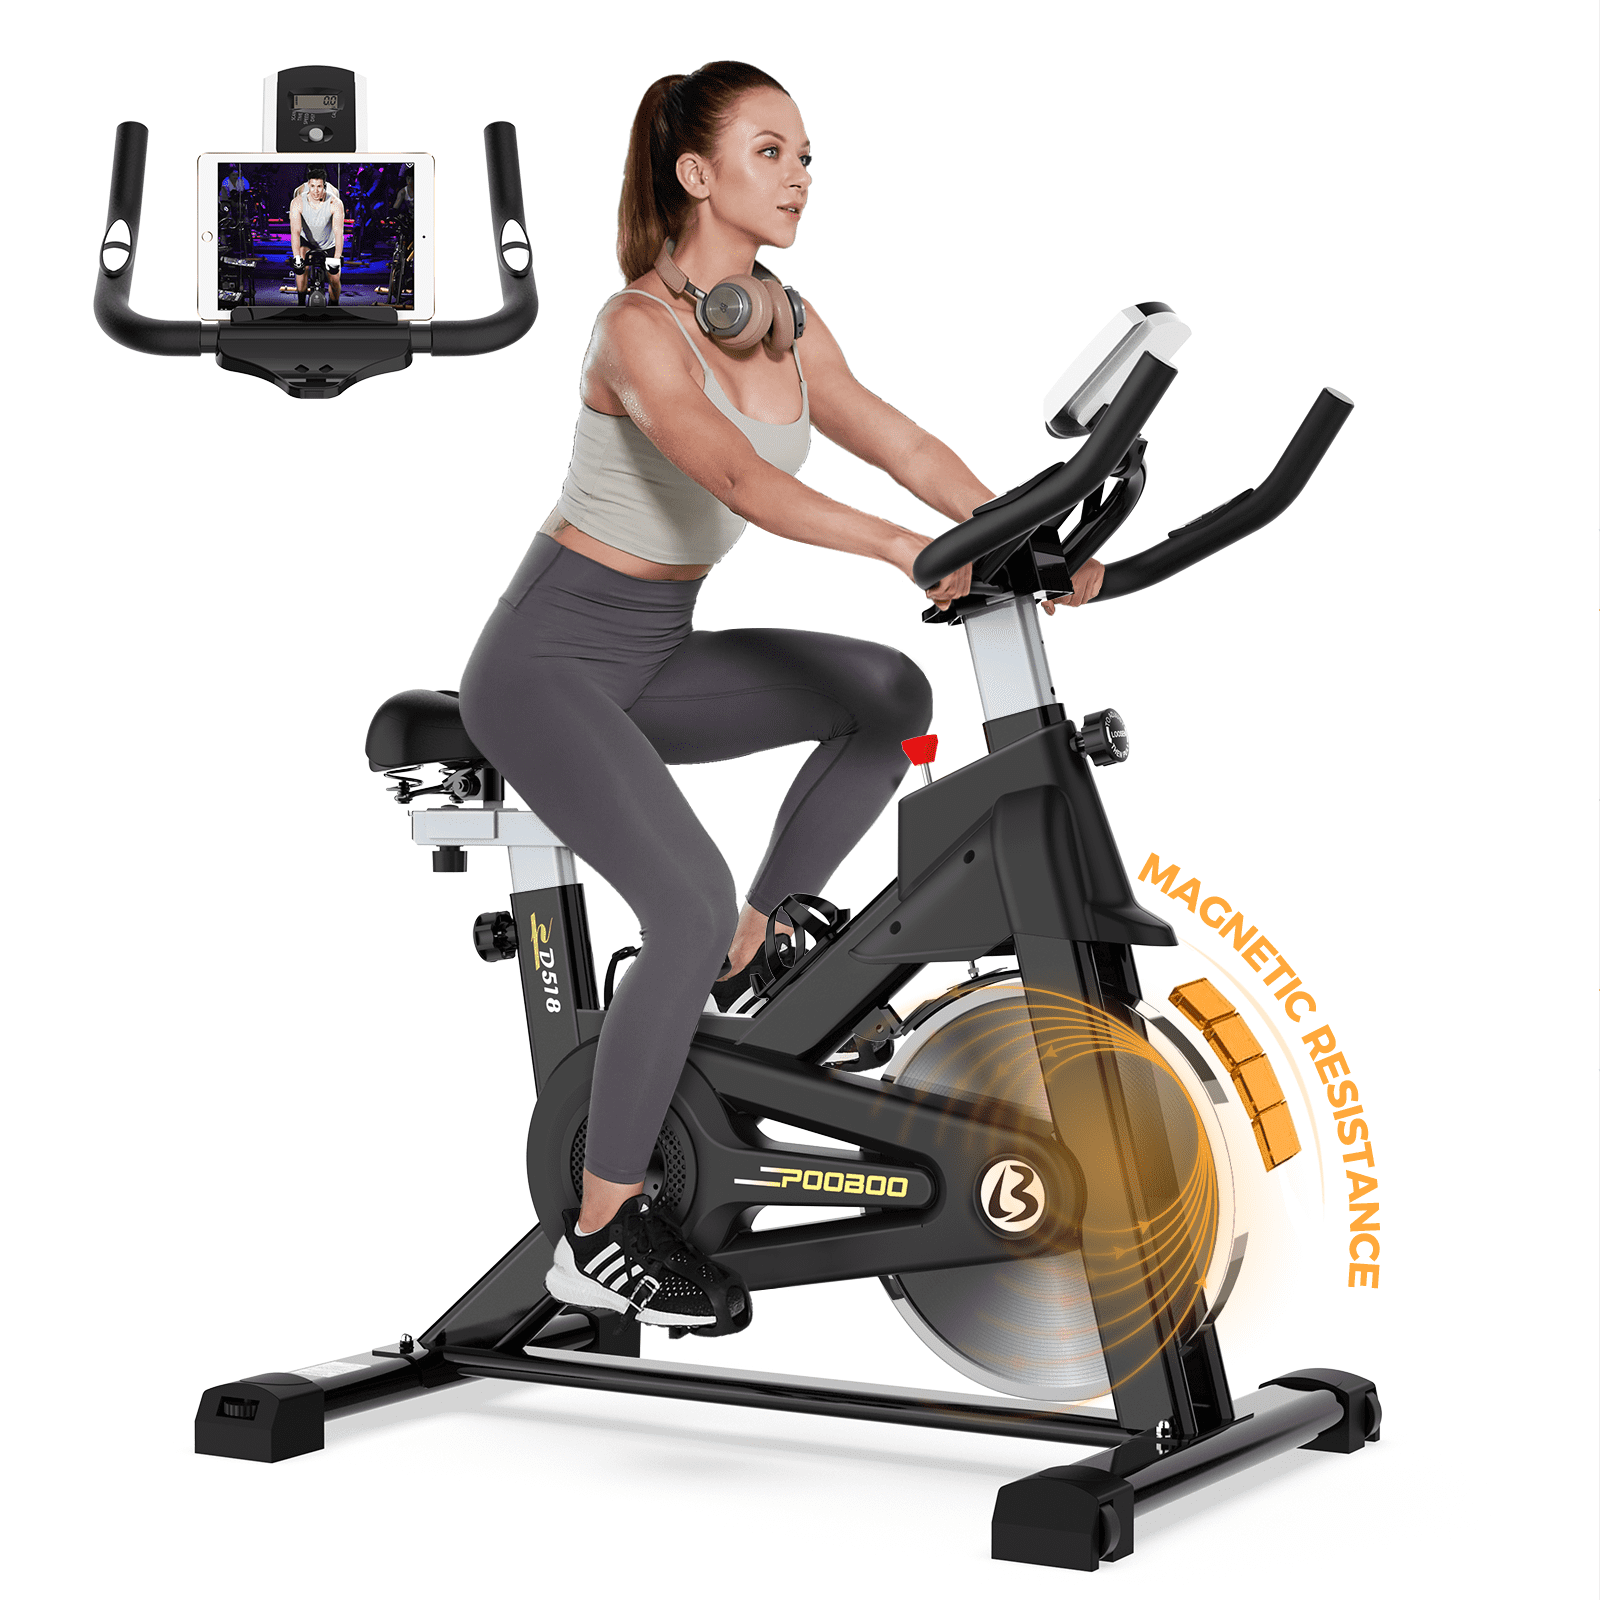 Pooboo Indoor Stationary Magnetic Resistance Cycling Exercise Bike